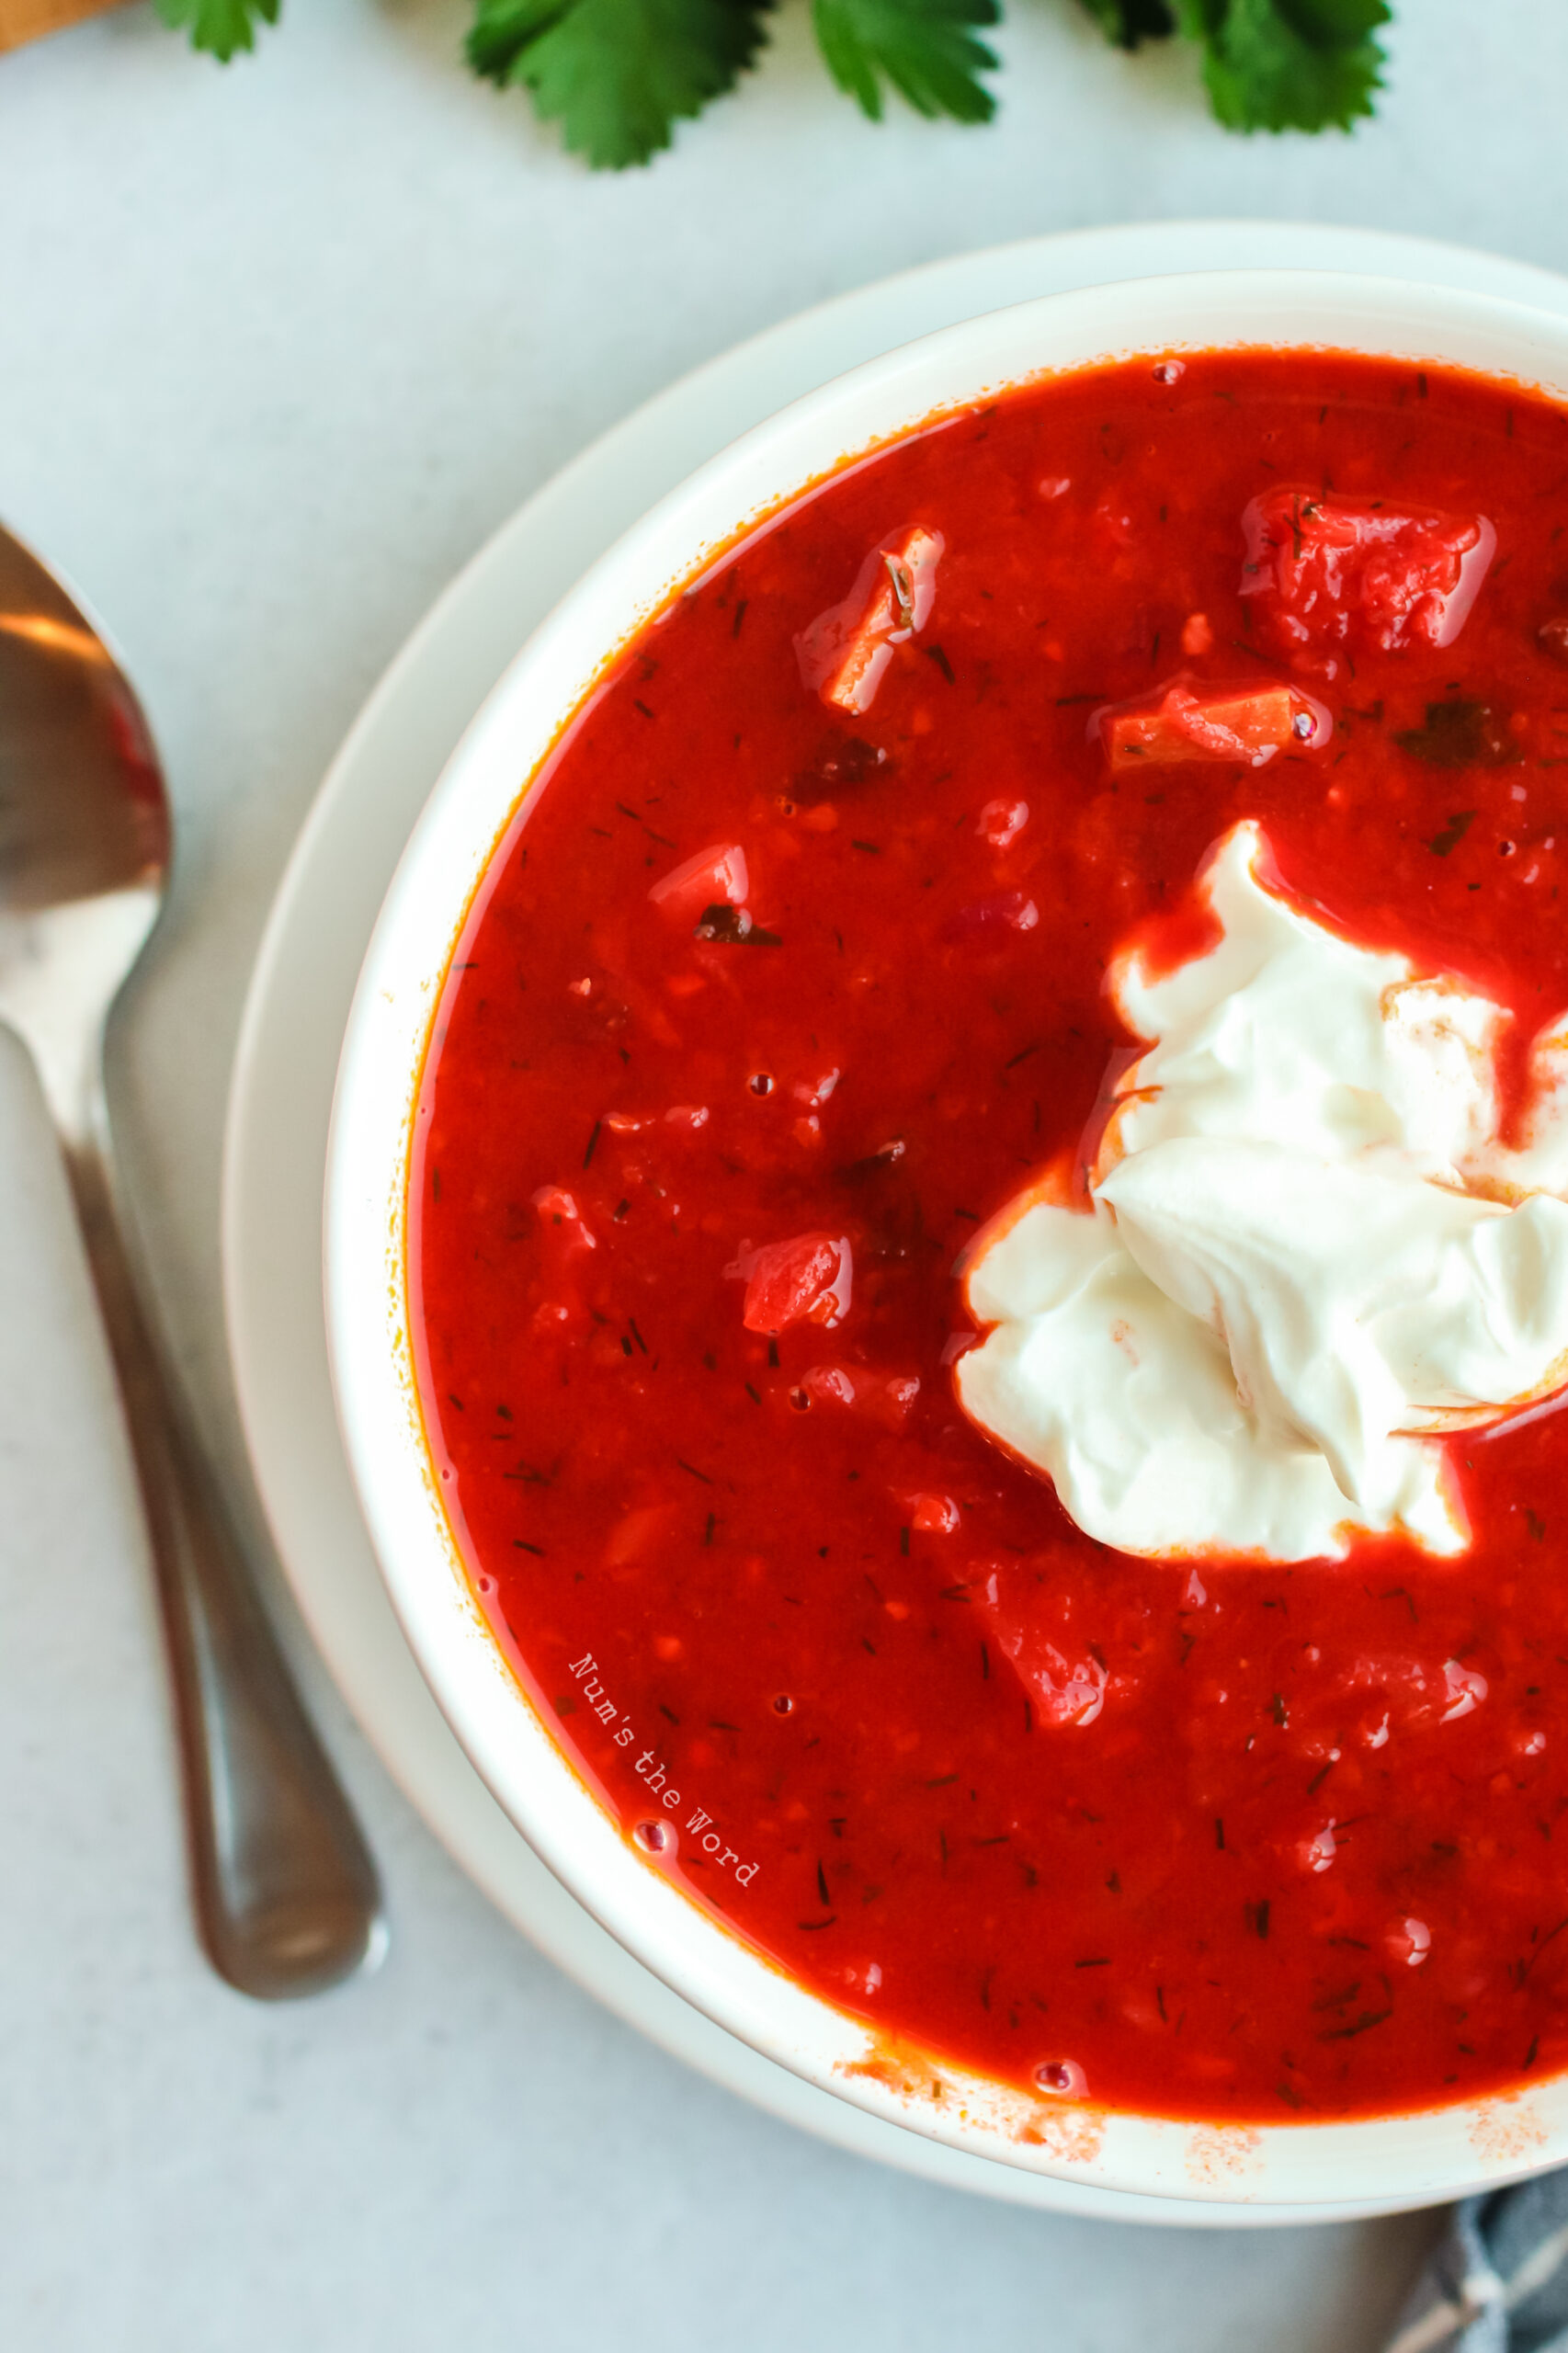 borscht put in a bowl and topped with sour cream - top view